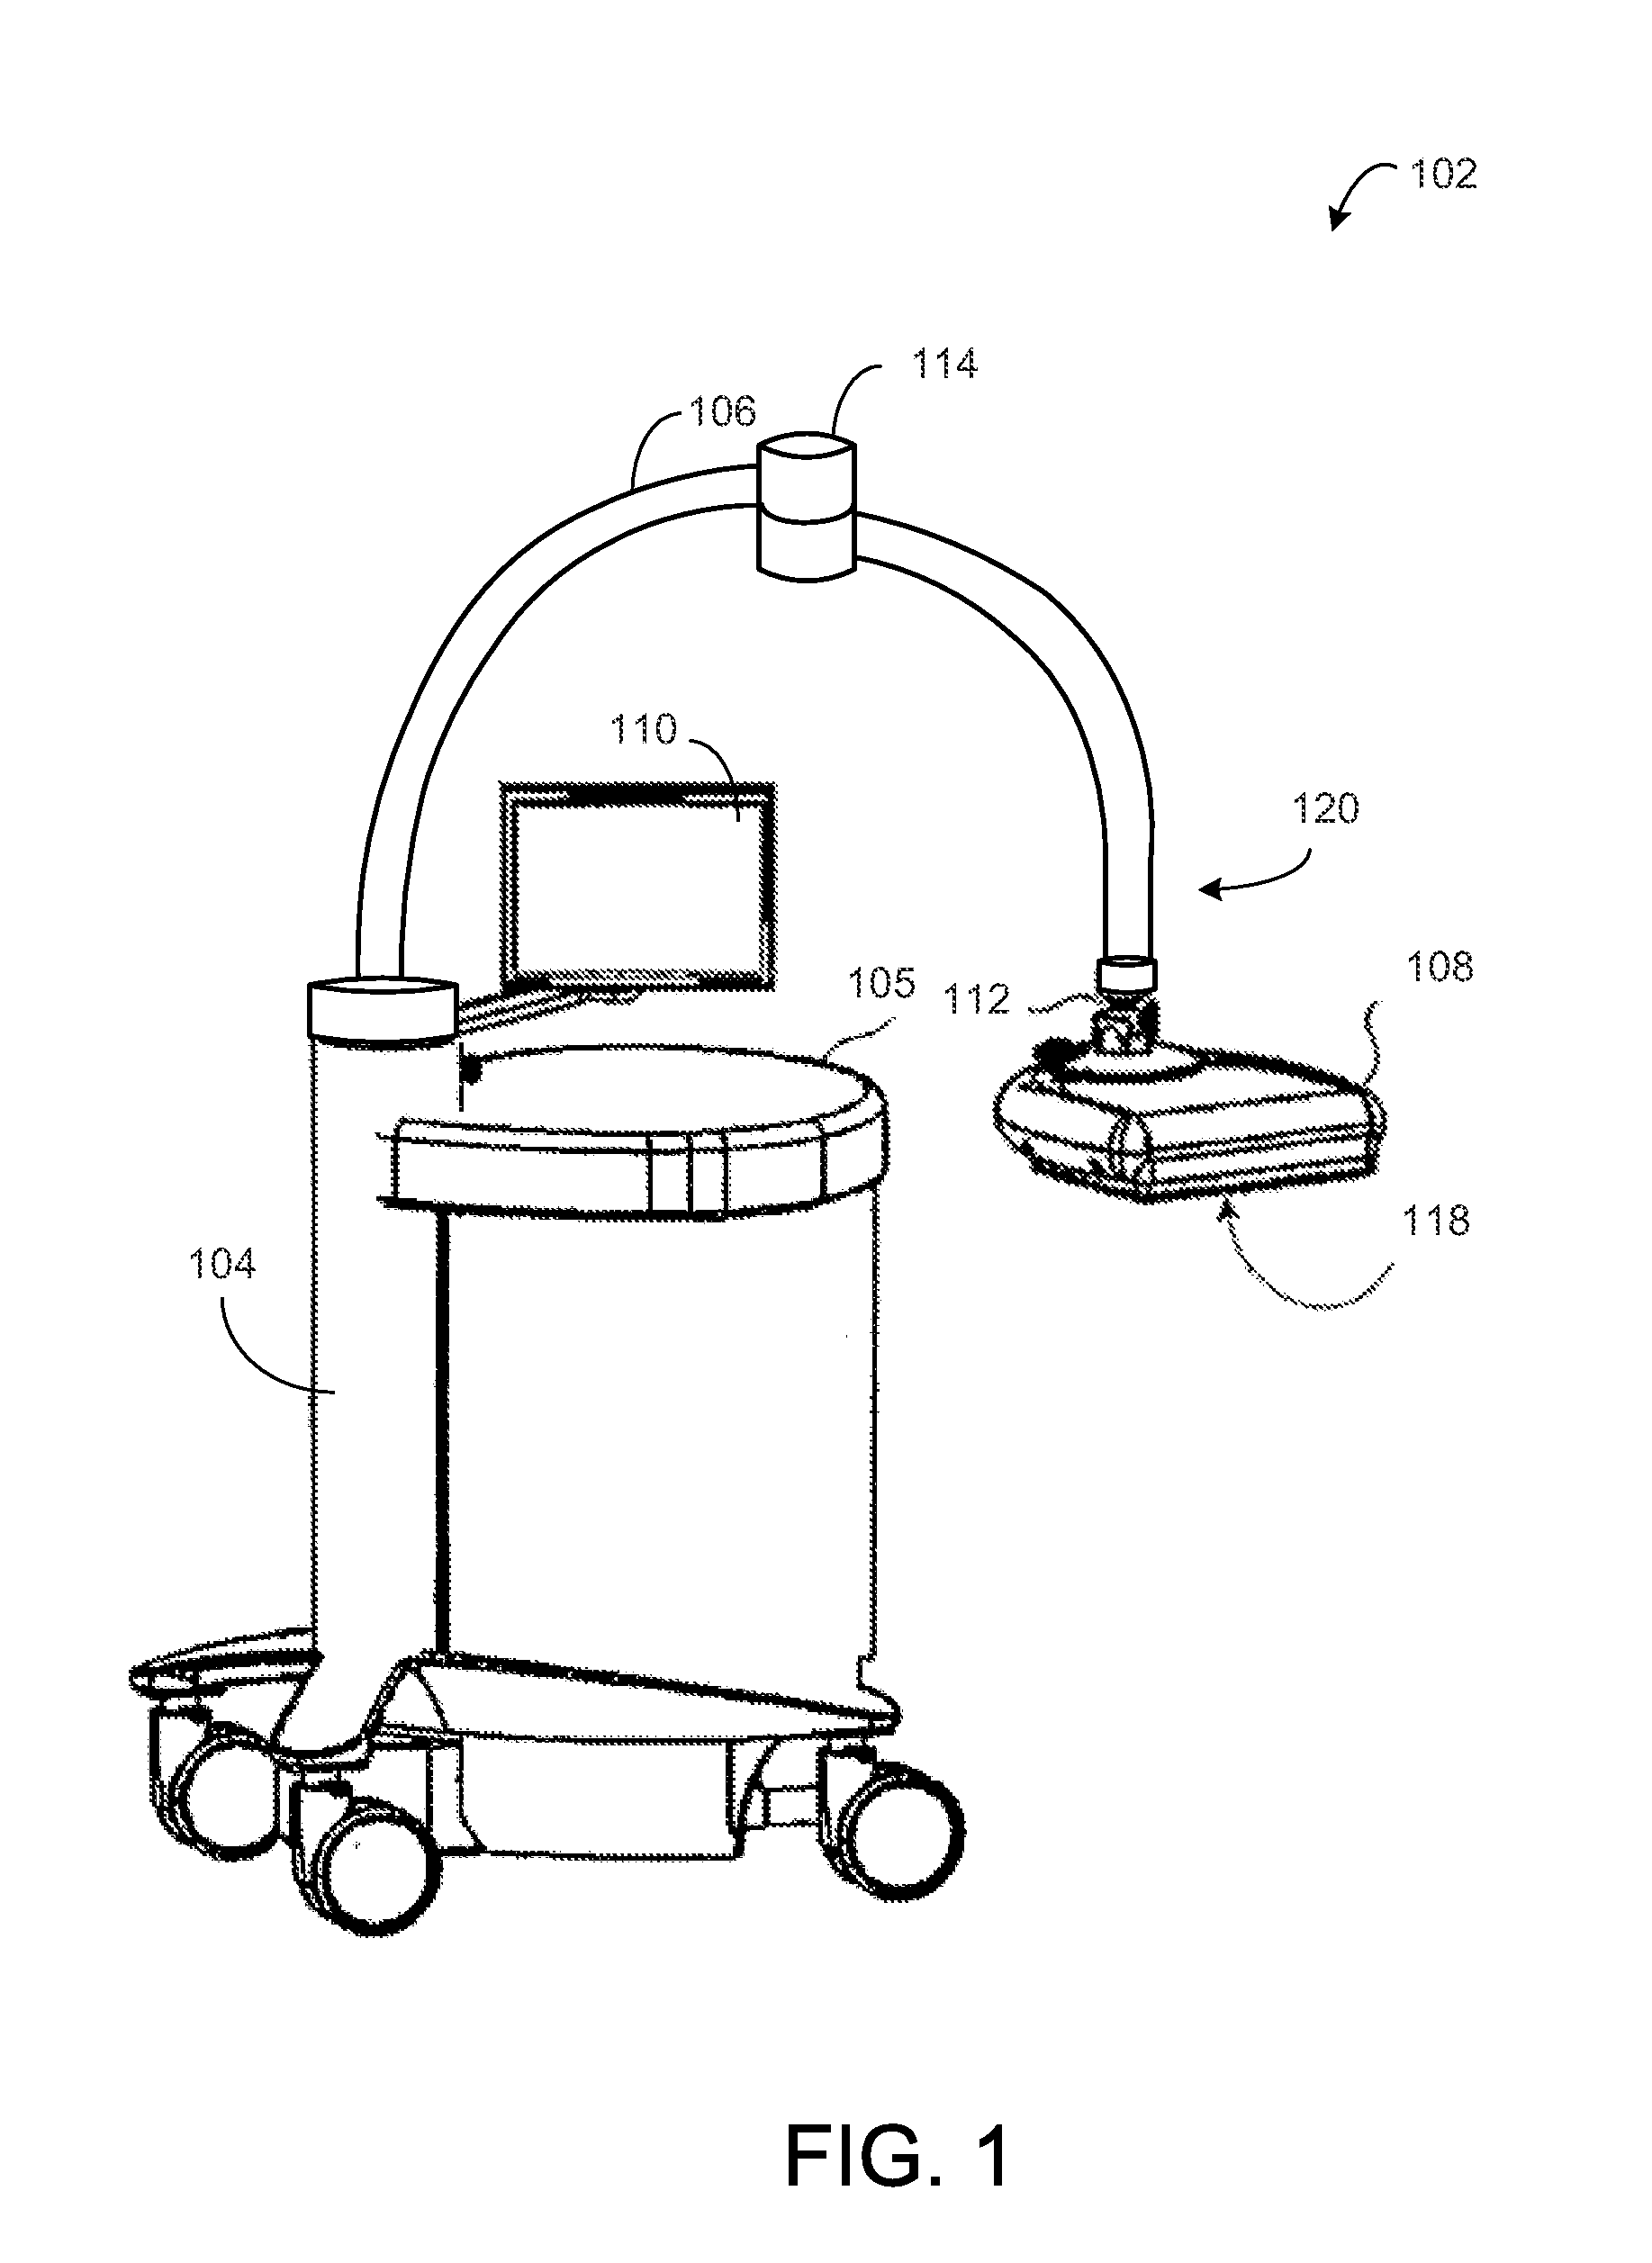 Method and systems for a removable transducer with memory of an automated breast ultrasound system